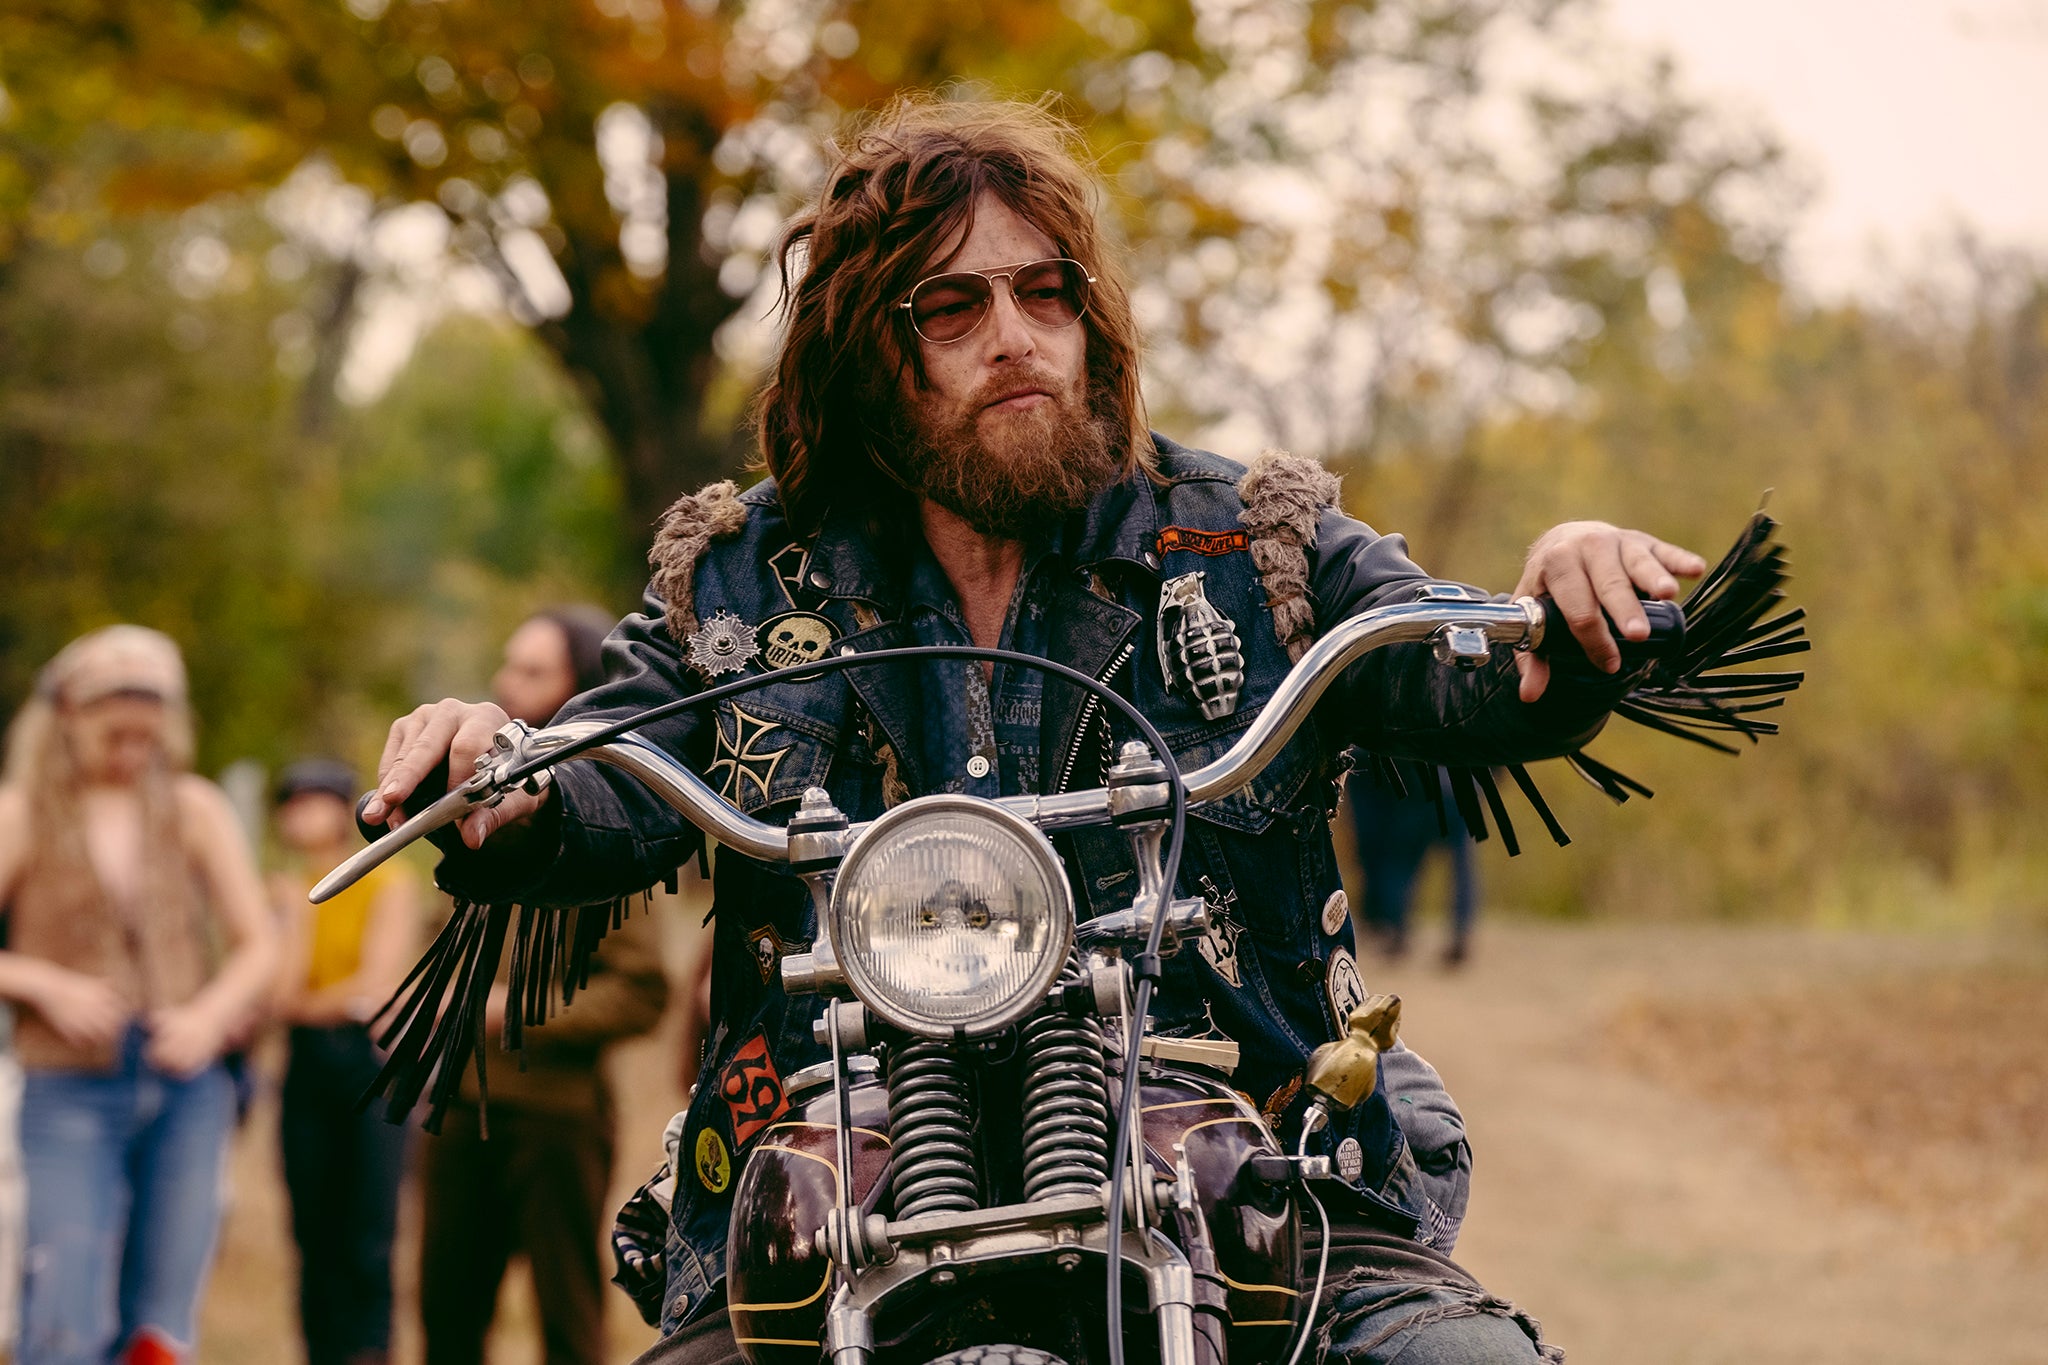 Hell for leather: Norman Reedus in 'The Bikeriders'